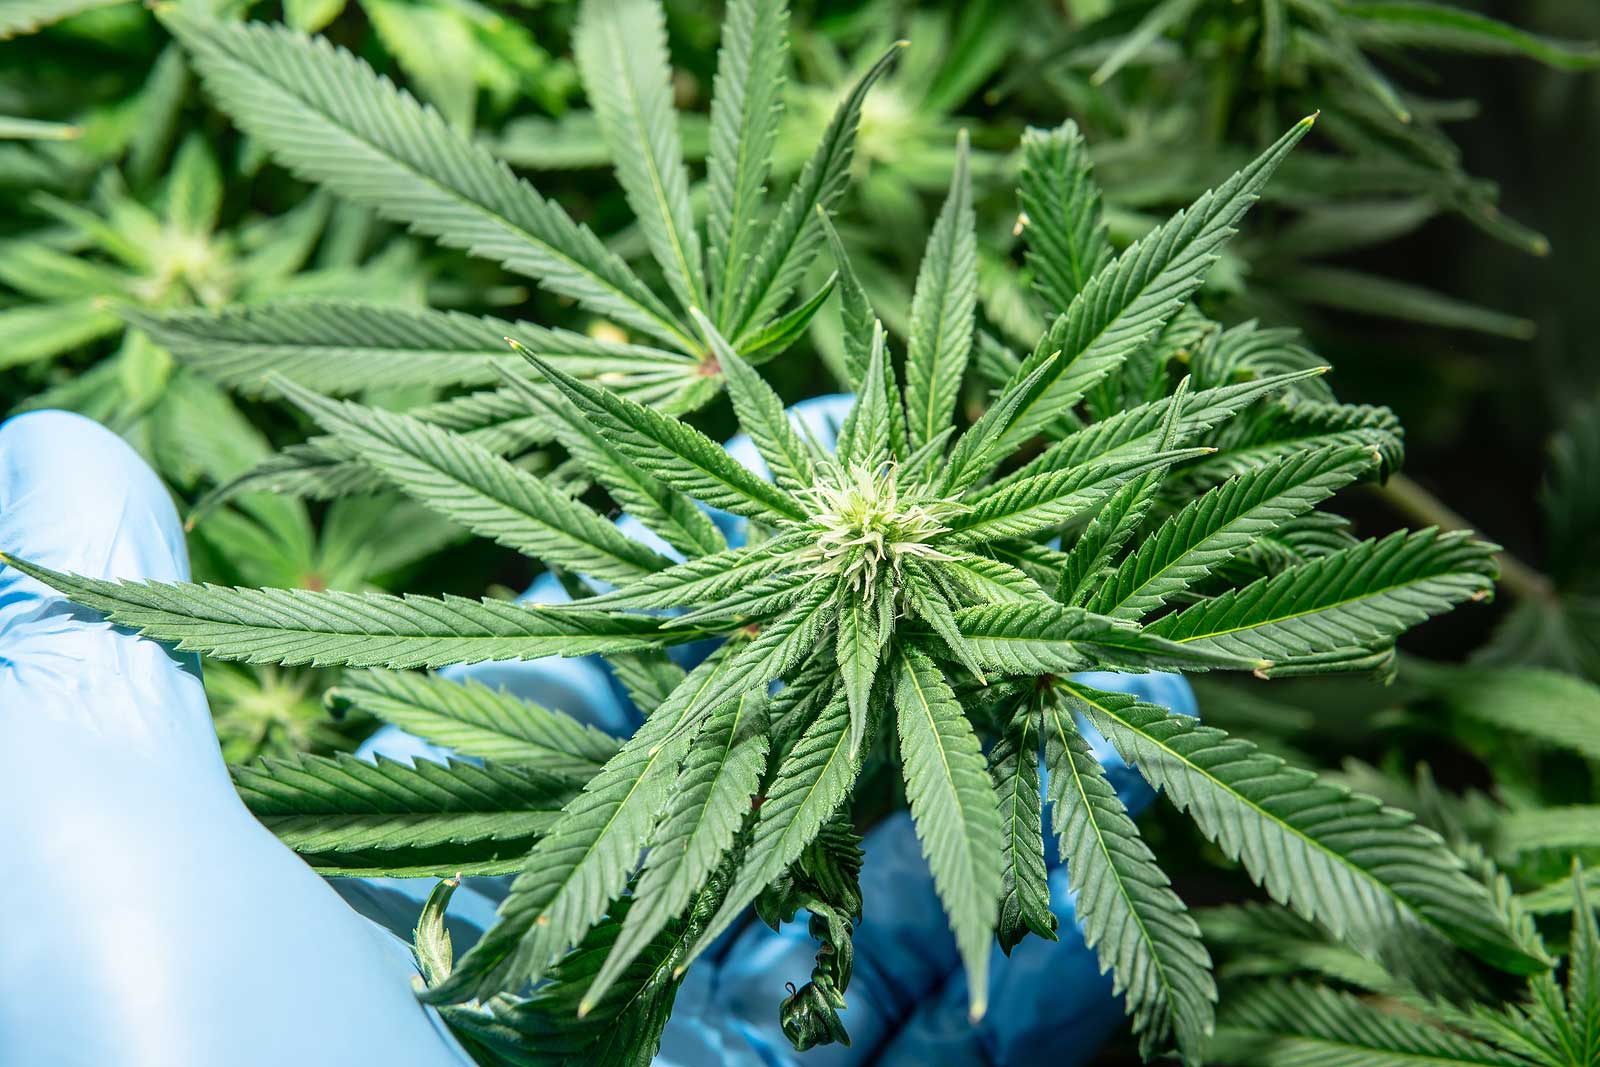 First Signs of Flowering Stage of the Cannabis Plant